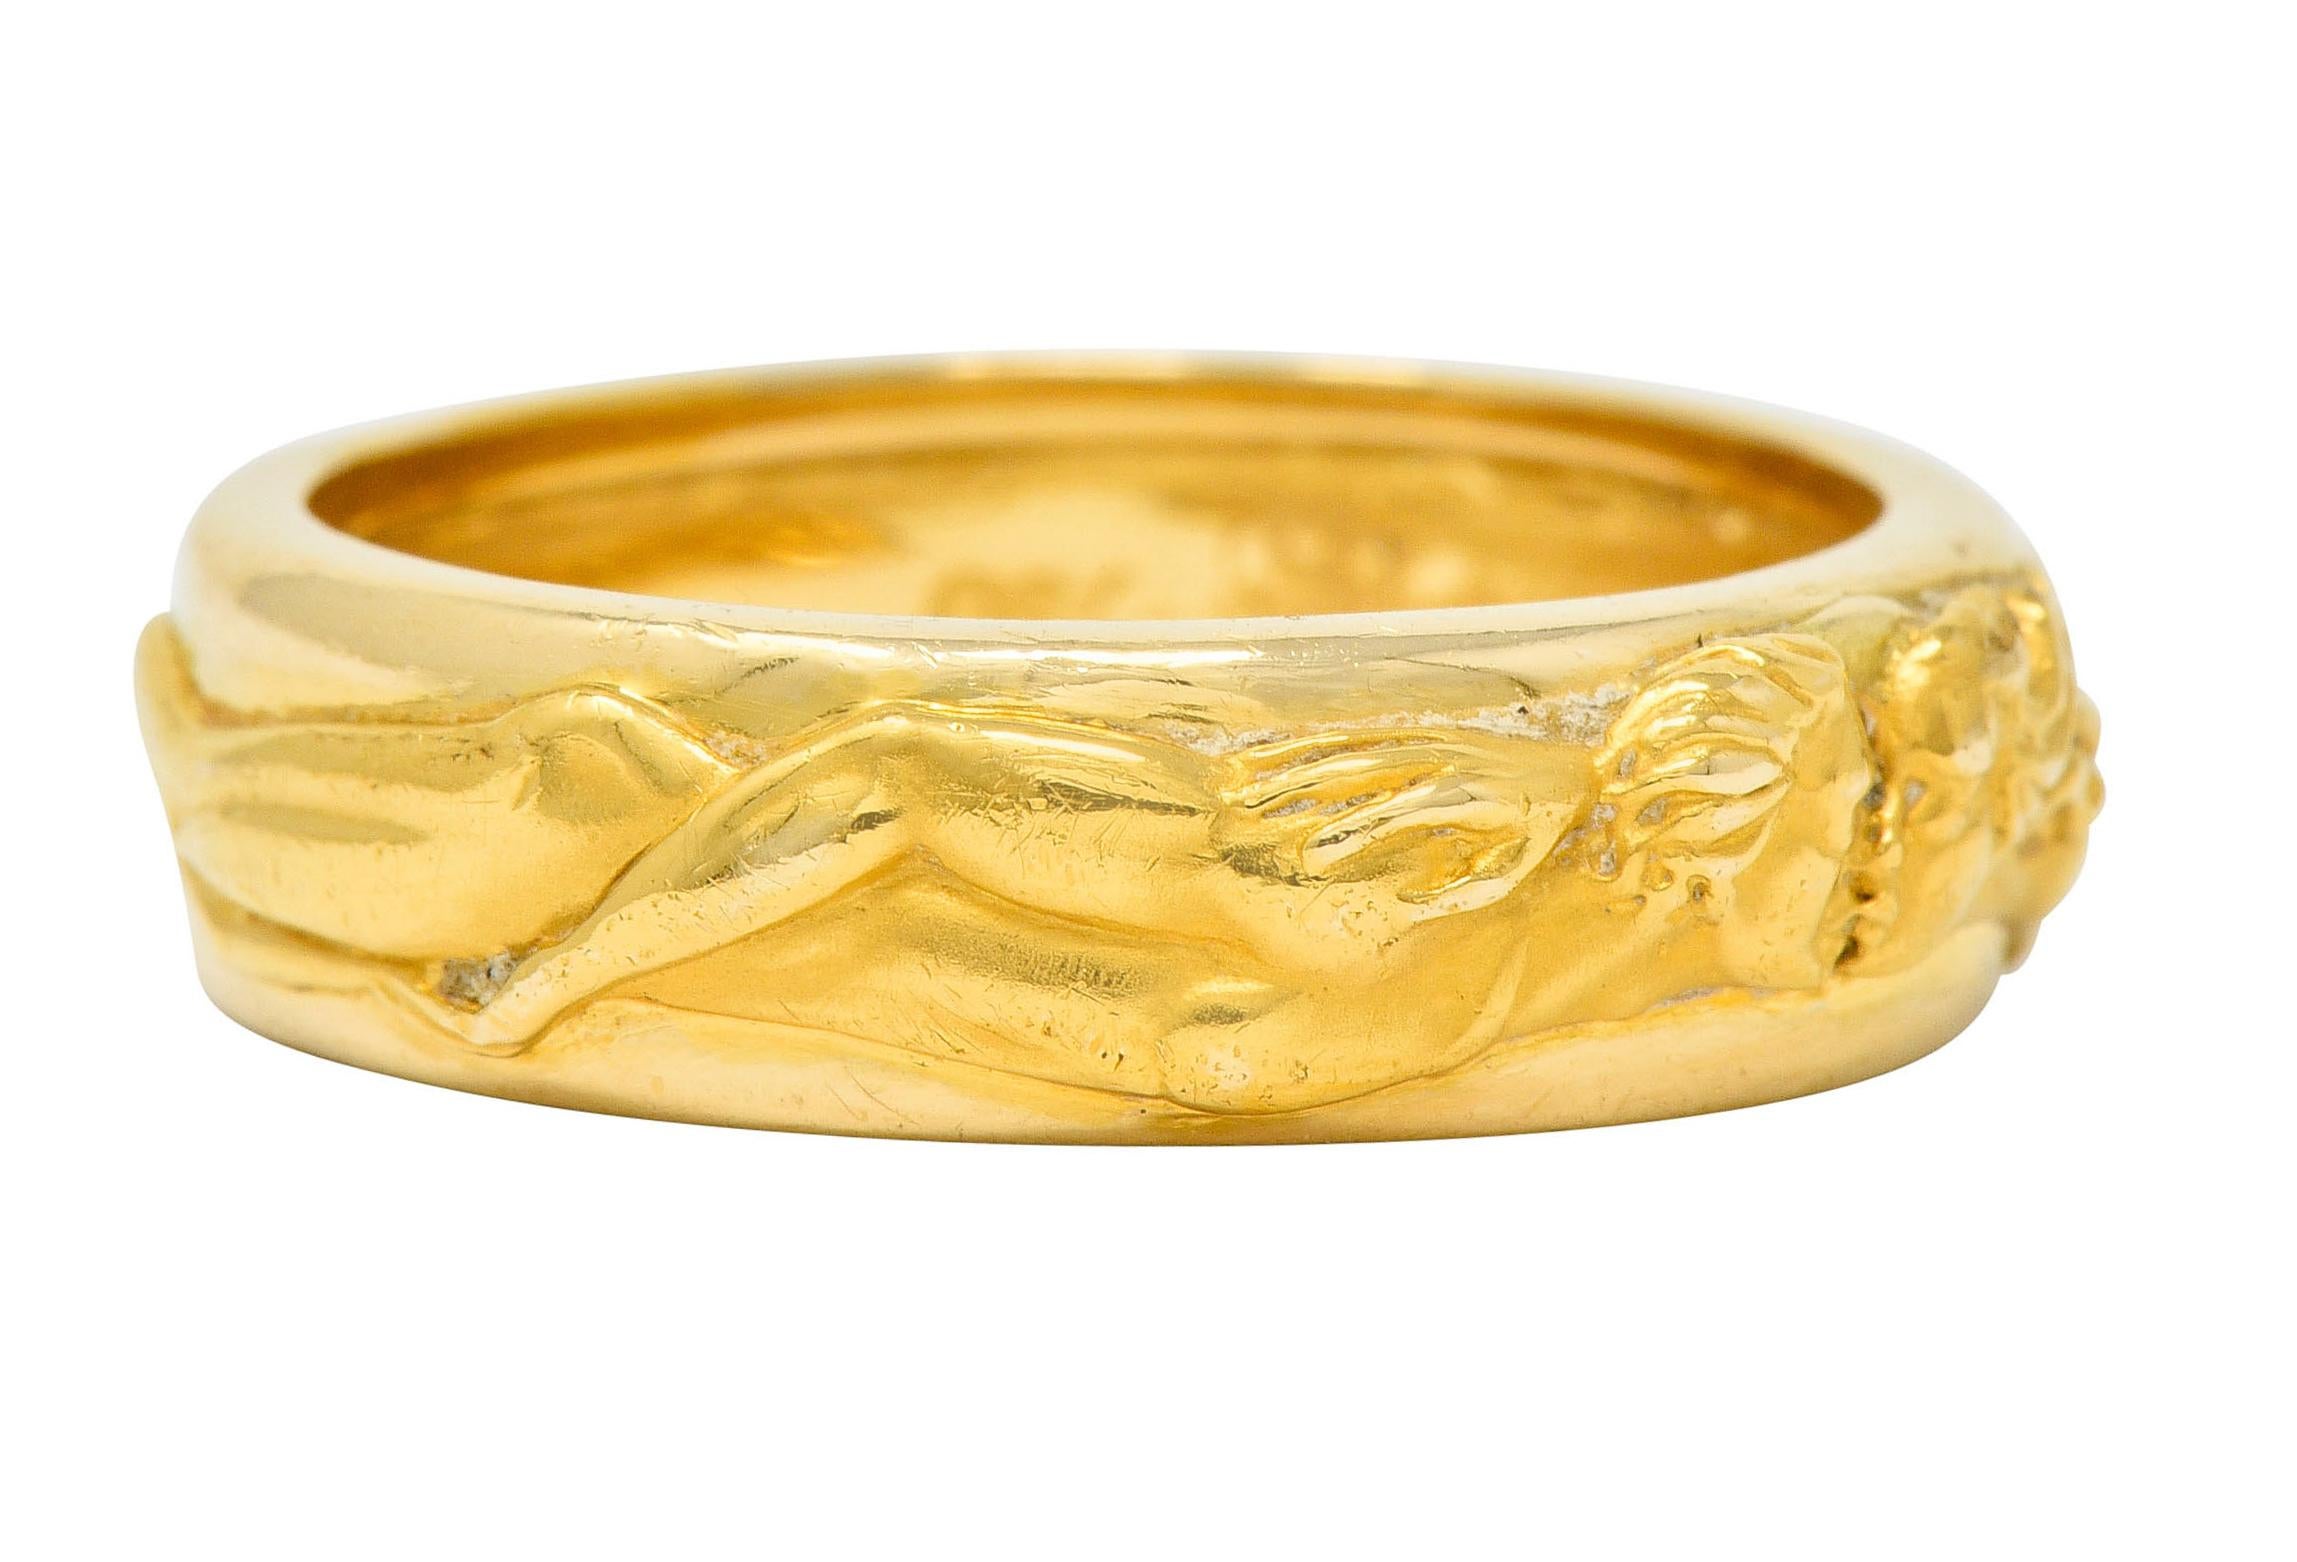 Band style ring depicting two highly rendered full-bodied figures wrapped fully around the shank, male and female

Figures are facing one another, locked in a kiss

Completed by a bright finish

With maker's mark for Carrera Y Carrera

Stamped 750